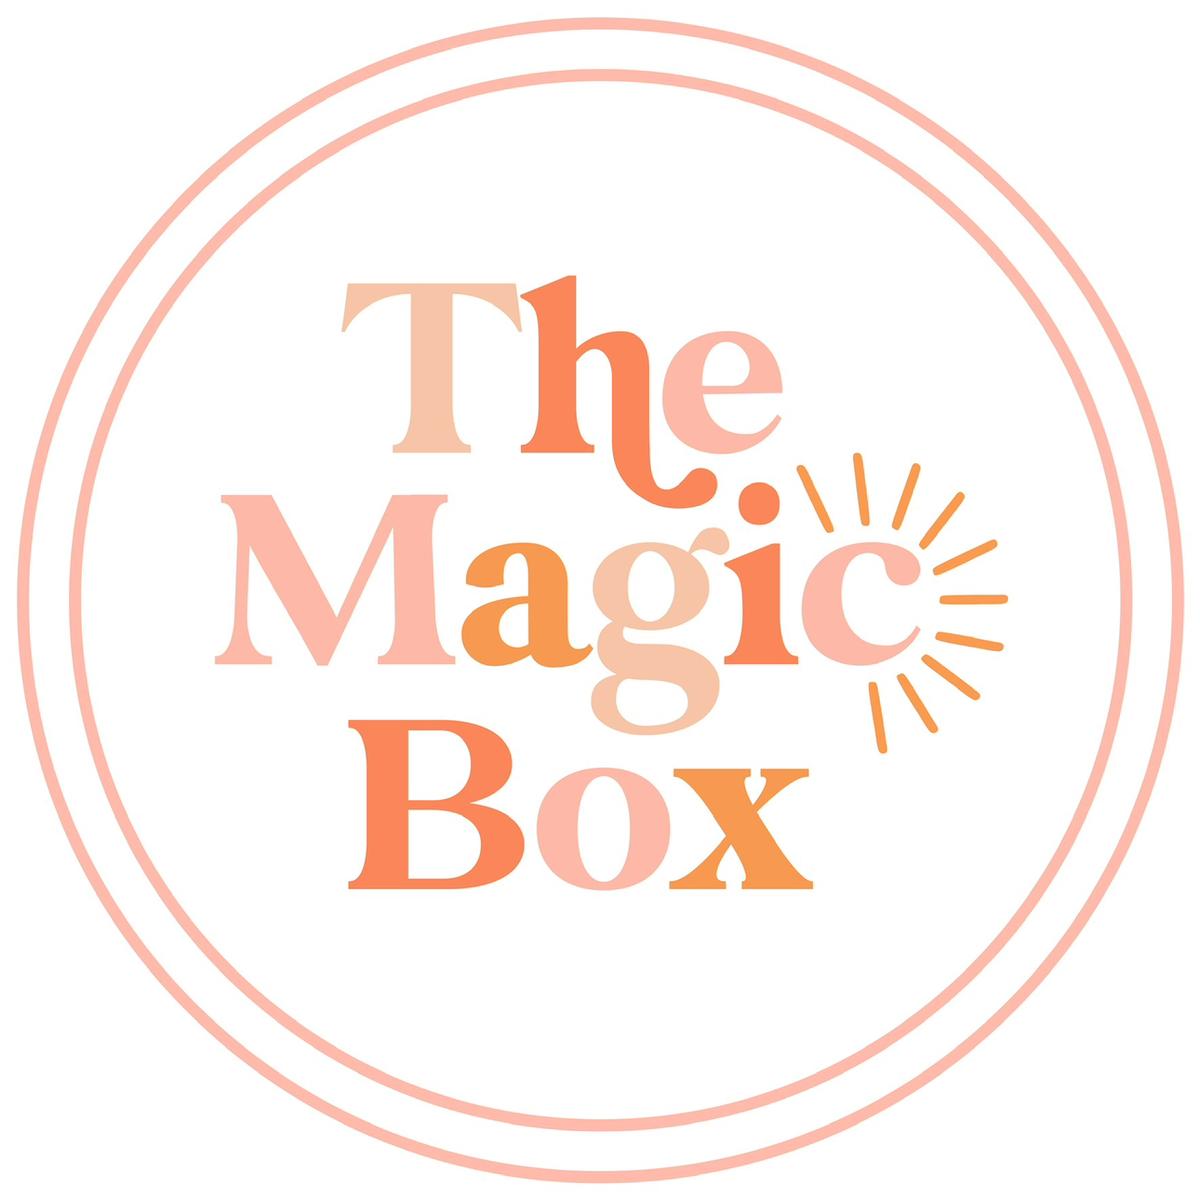 TheMagicBox's images